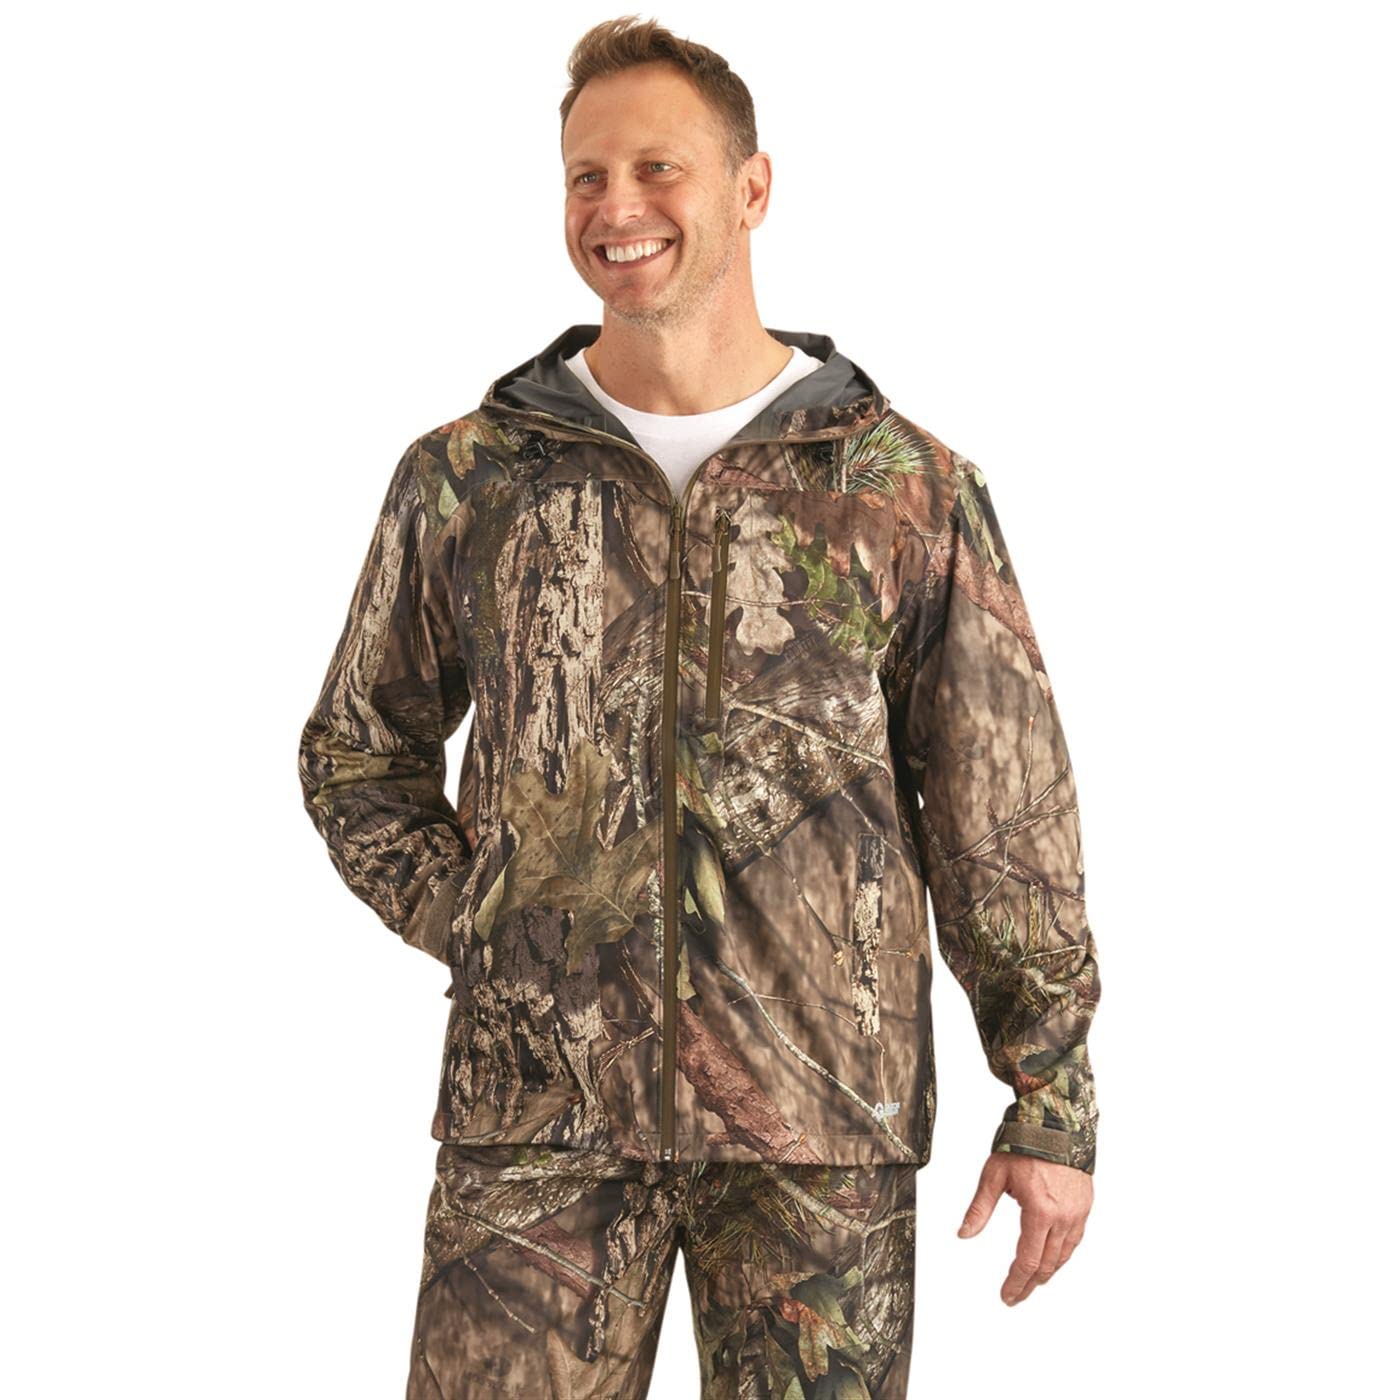 Guide Gear Men’s Stretch Waterproof Rain Jacket with Hood, Breathable Lightweight for Hunting Outdoors